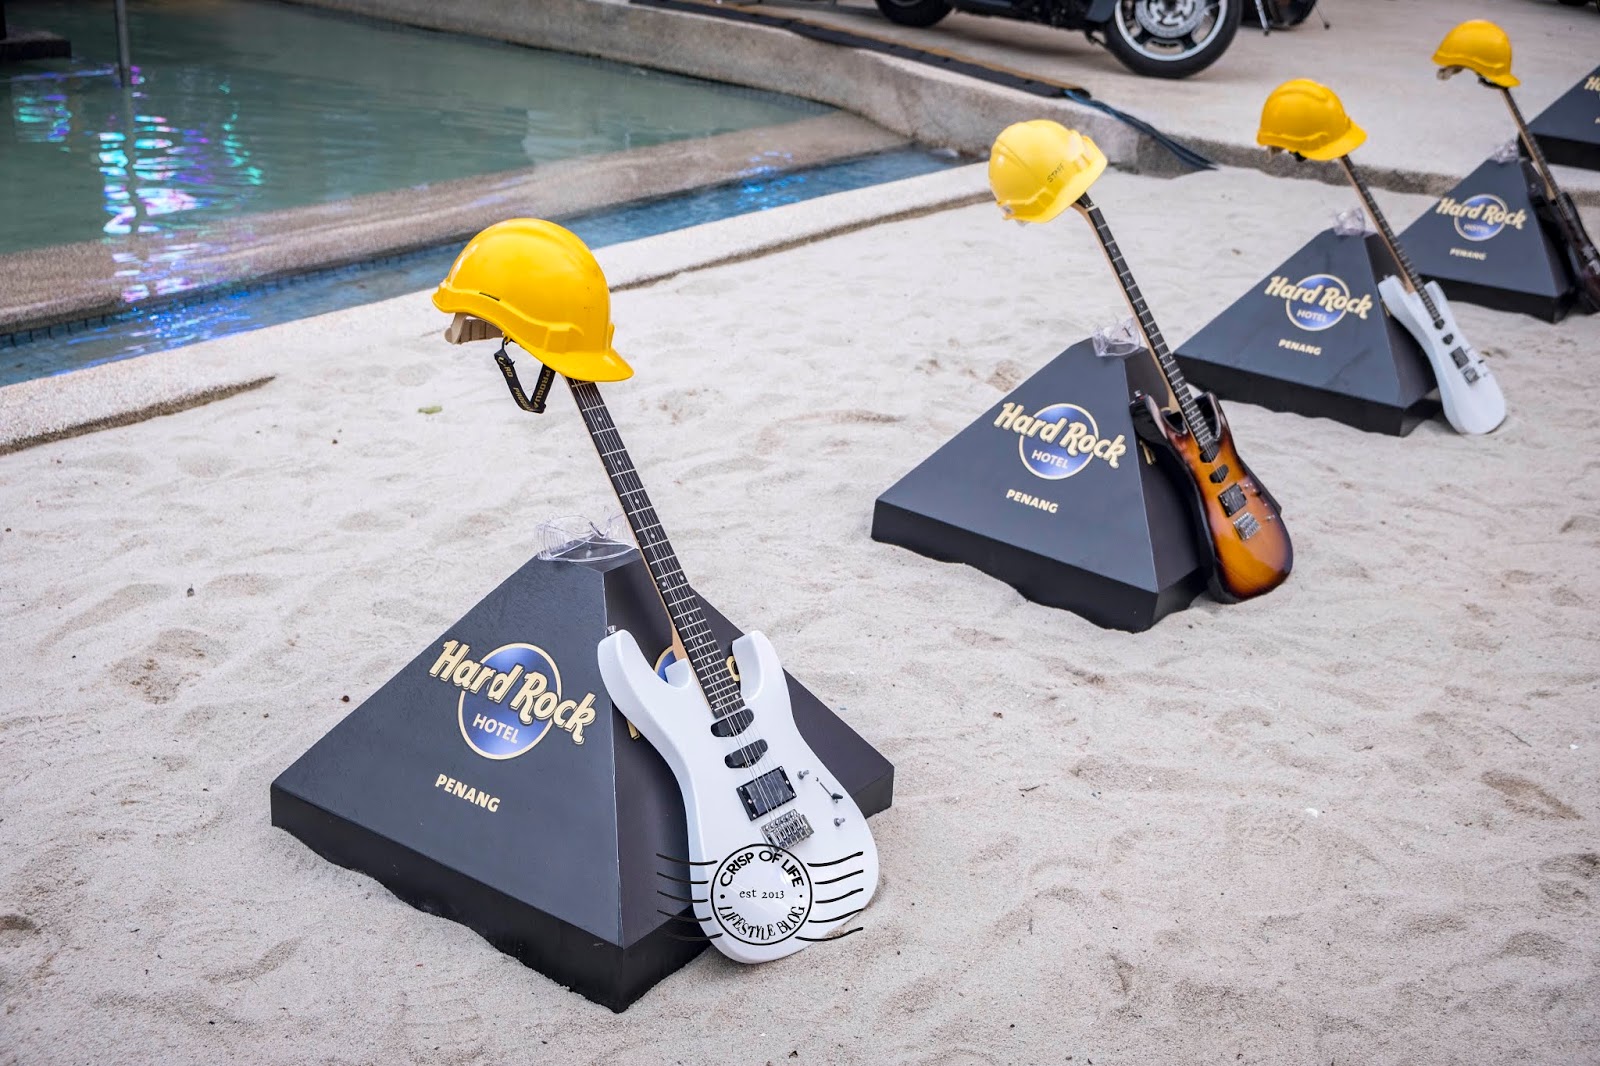 Hard Rock Hotel Penang Celebrates 10th Anniversary with a Rockin' Poolside Party and Proton X70 Giveaway! 